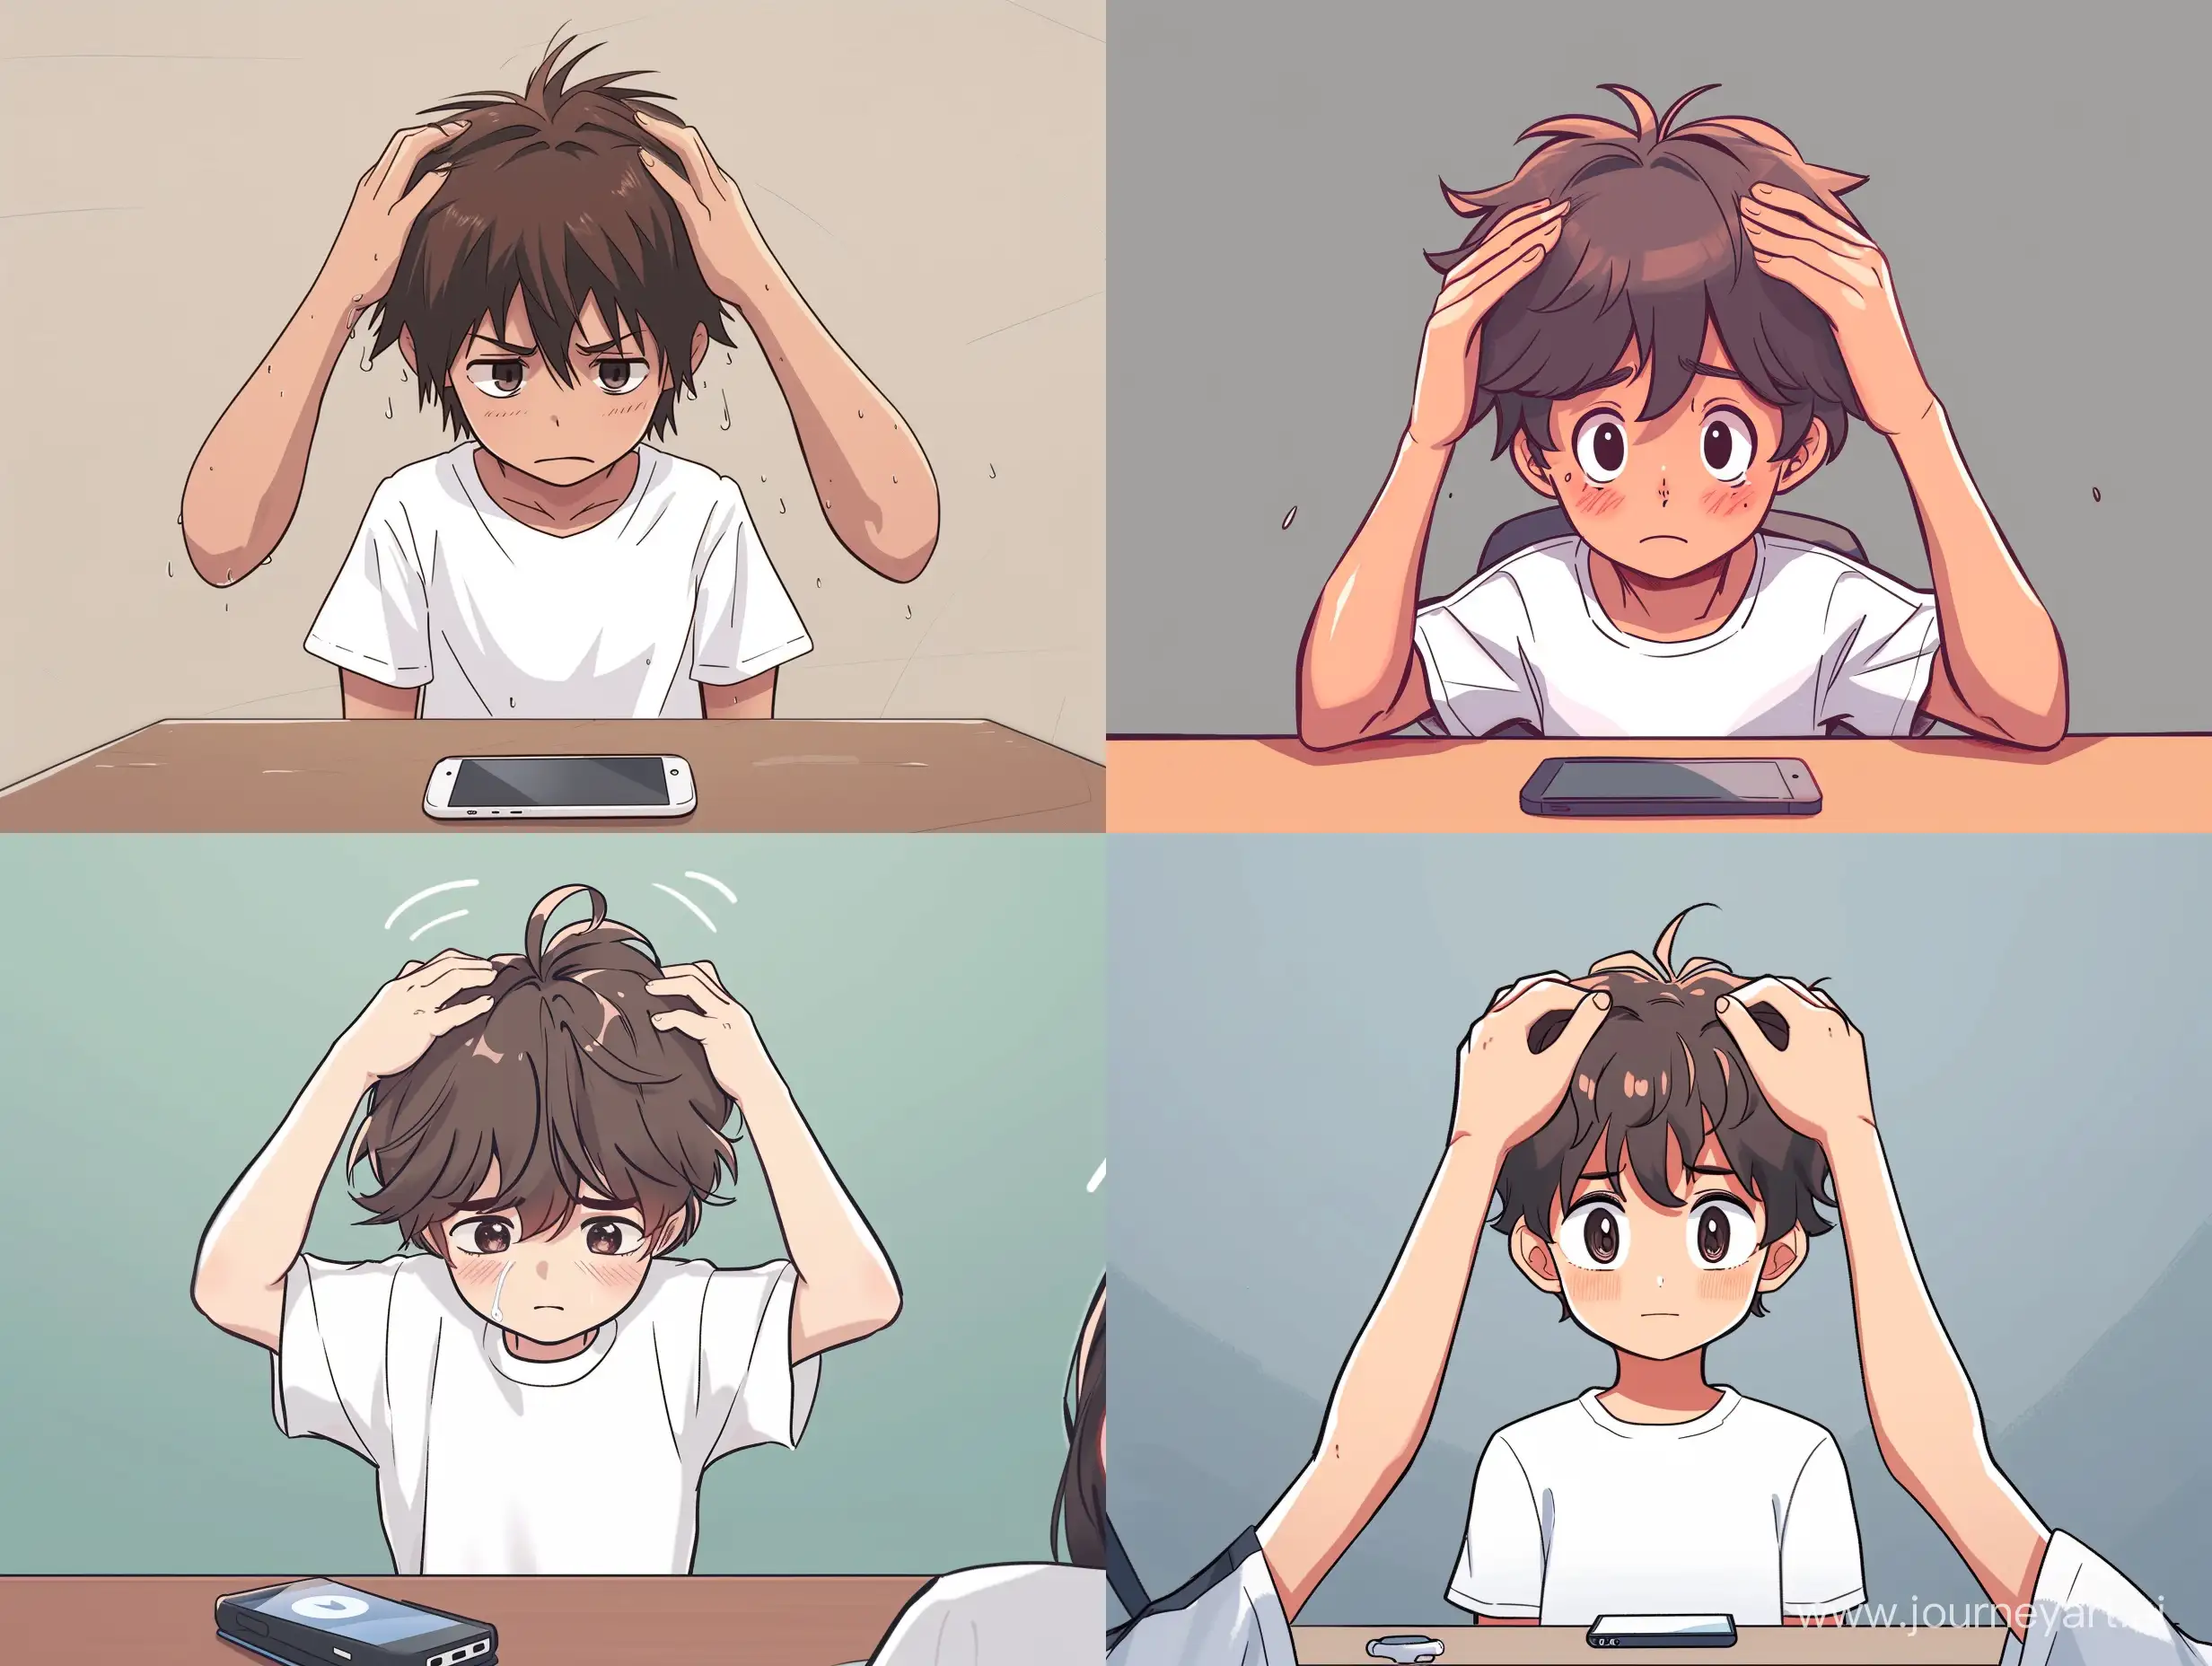 ((anime style, slightly chibi style)), a boy bow your head to the table, two hands scratch the hair, there is a smartphone on the table, 3/4 view, best quality, desperate expression, white T-shirt, head tilt down  --ar 4:3 